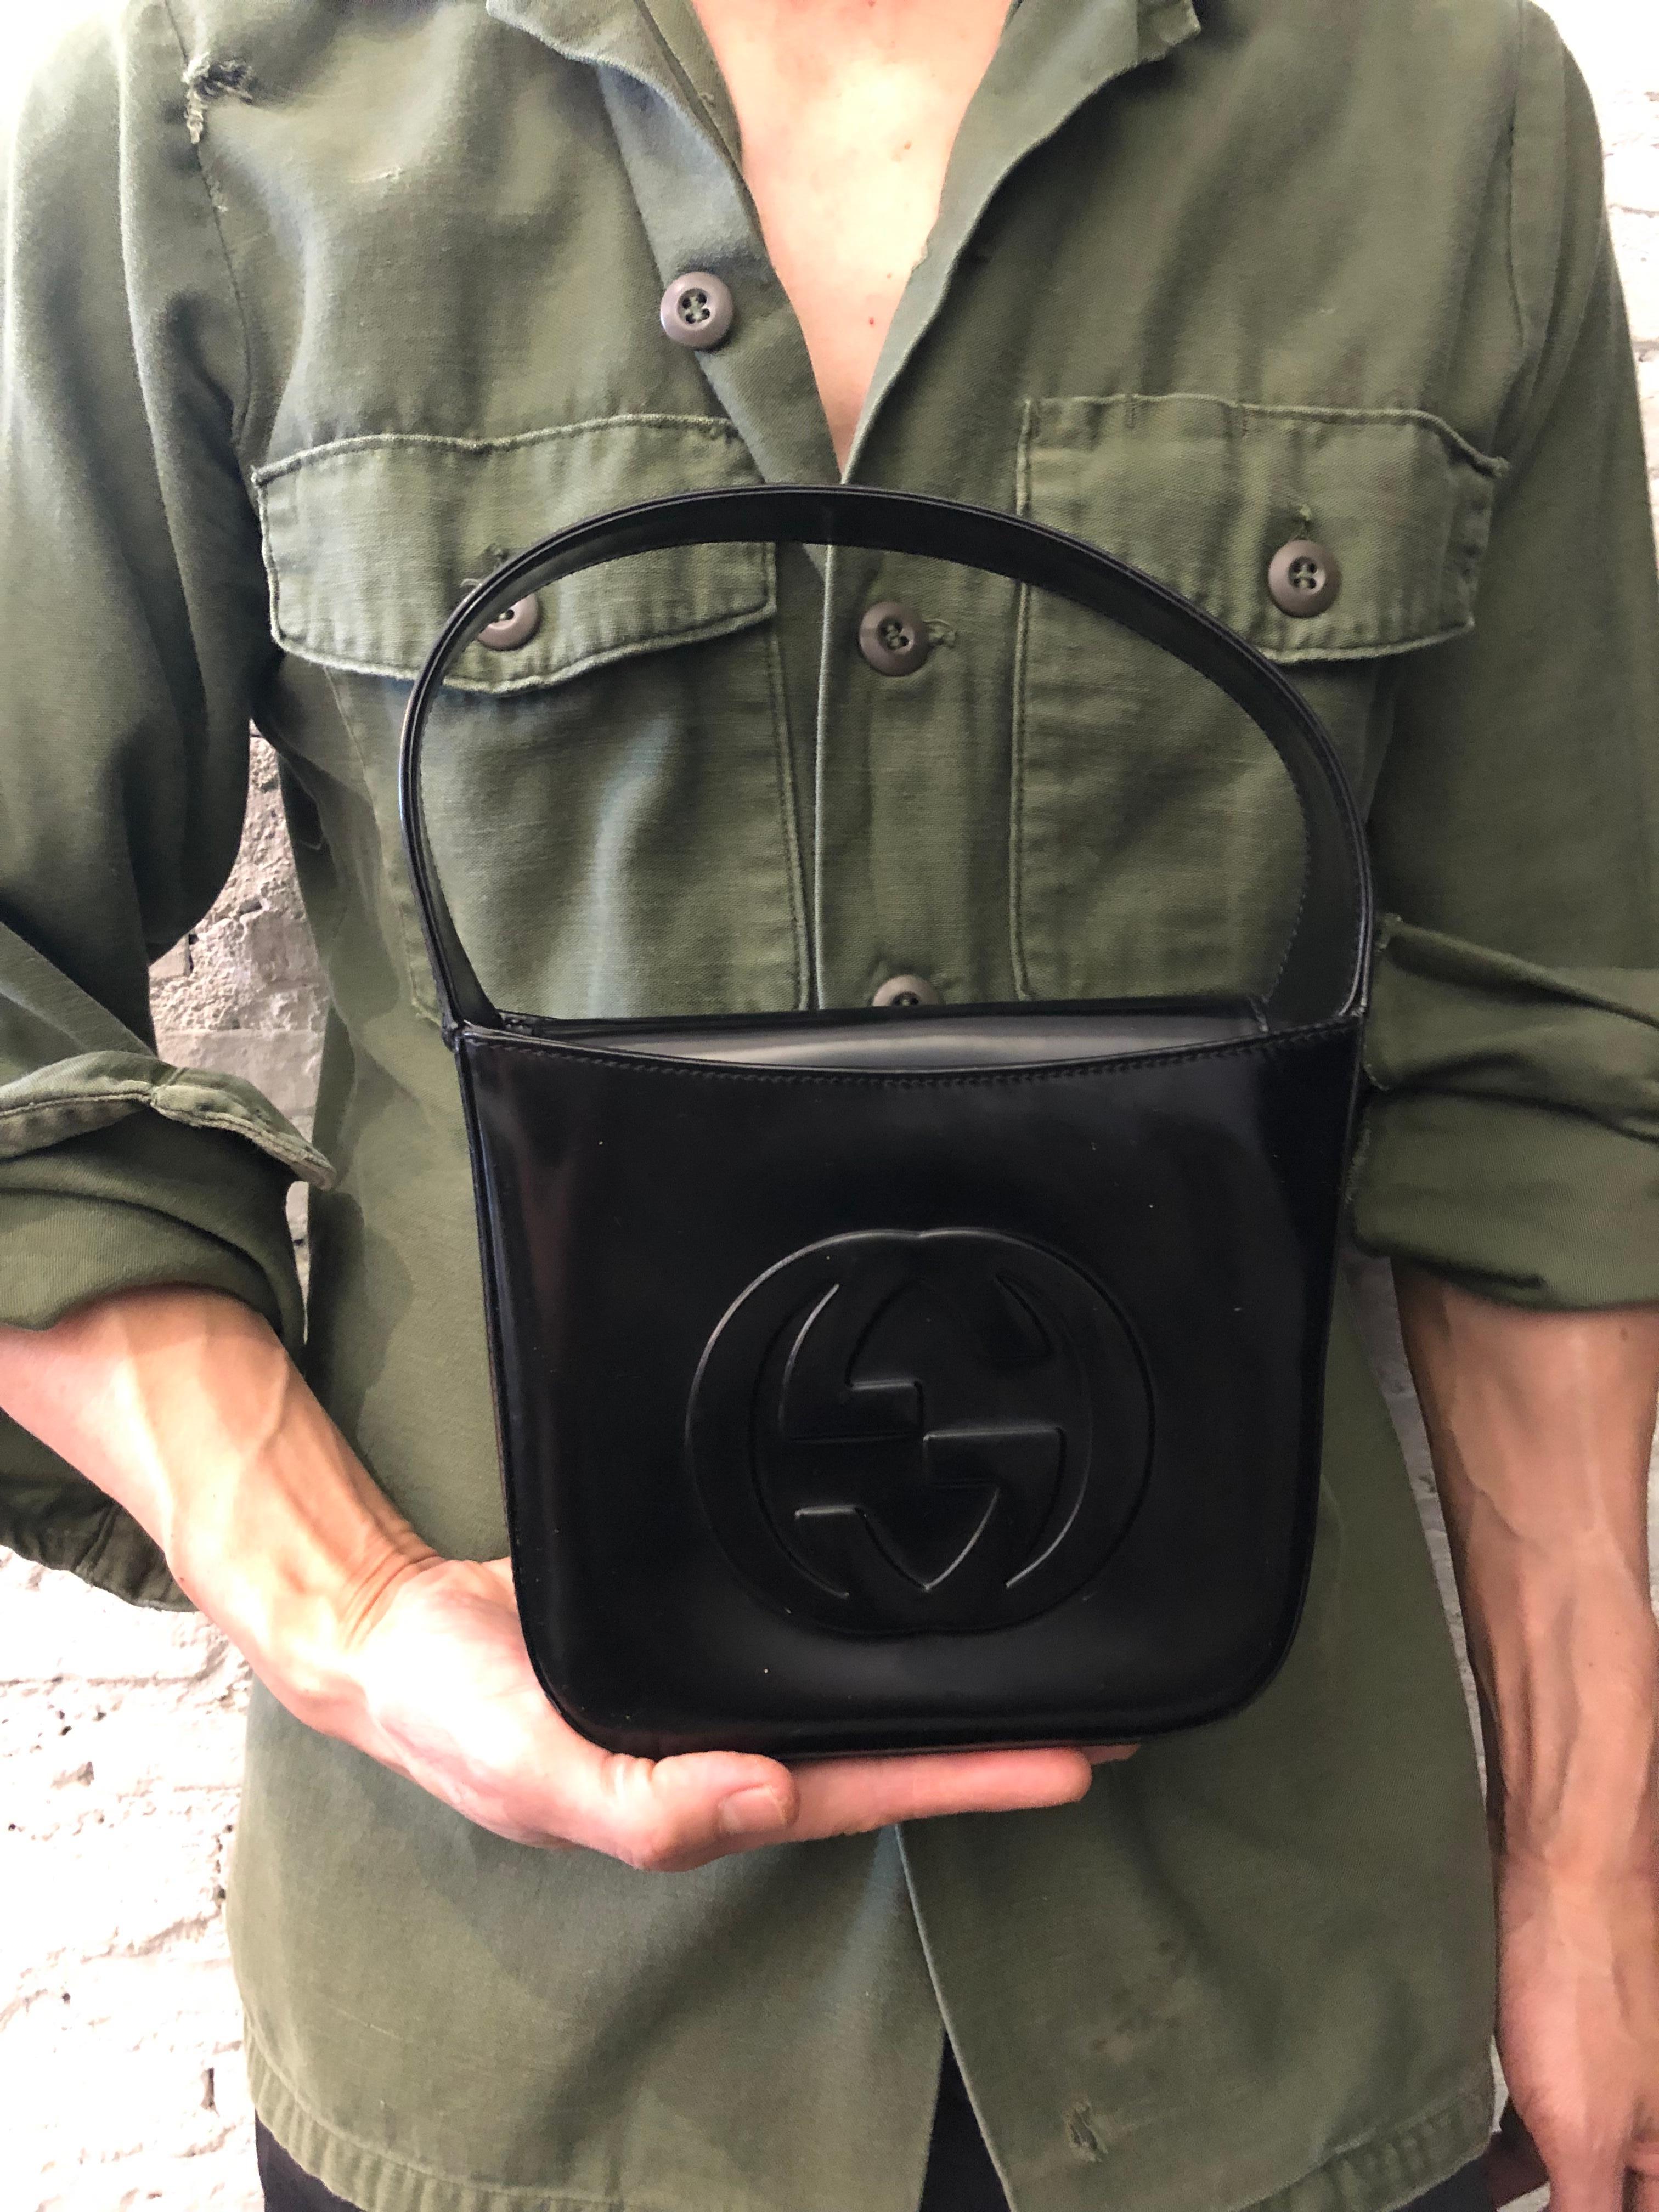 This vintage GUCCI Mini Hobo Handbag is crafted of smooth calfskin leather in black featuring a massive GG interlock Impression at the front. Top flap magnetic snap closure opens to a coated interior which has been professionally cleaned featuring a